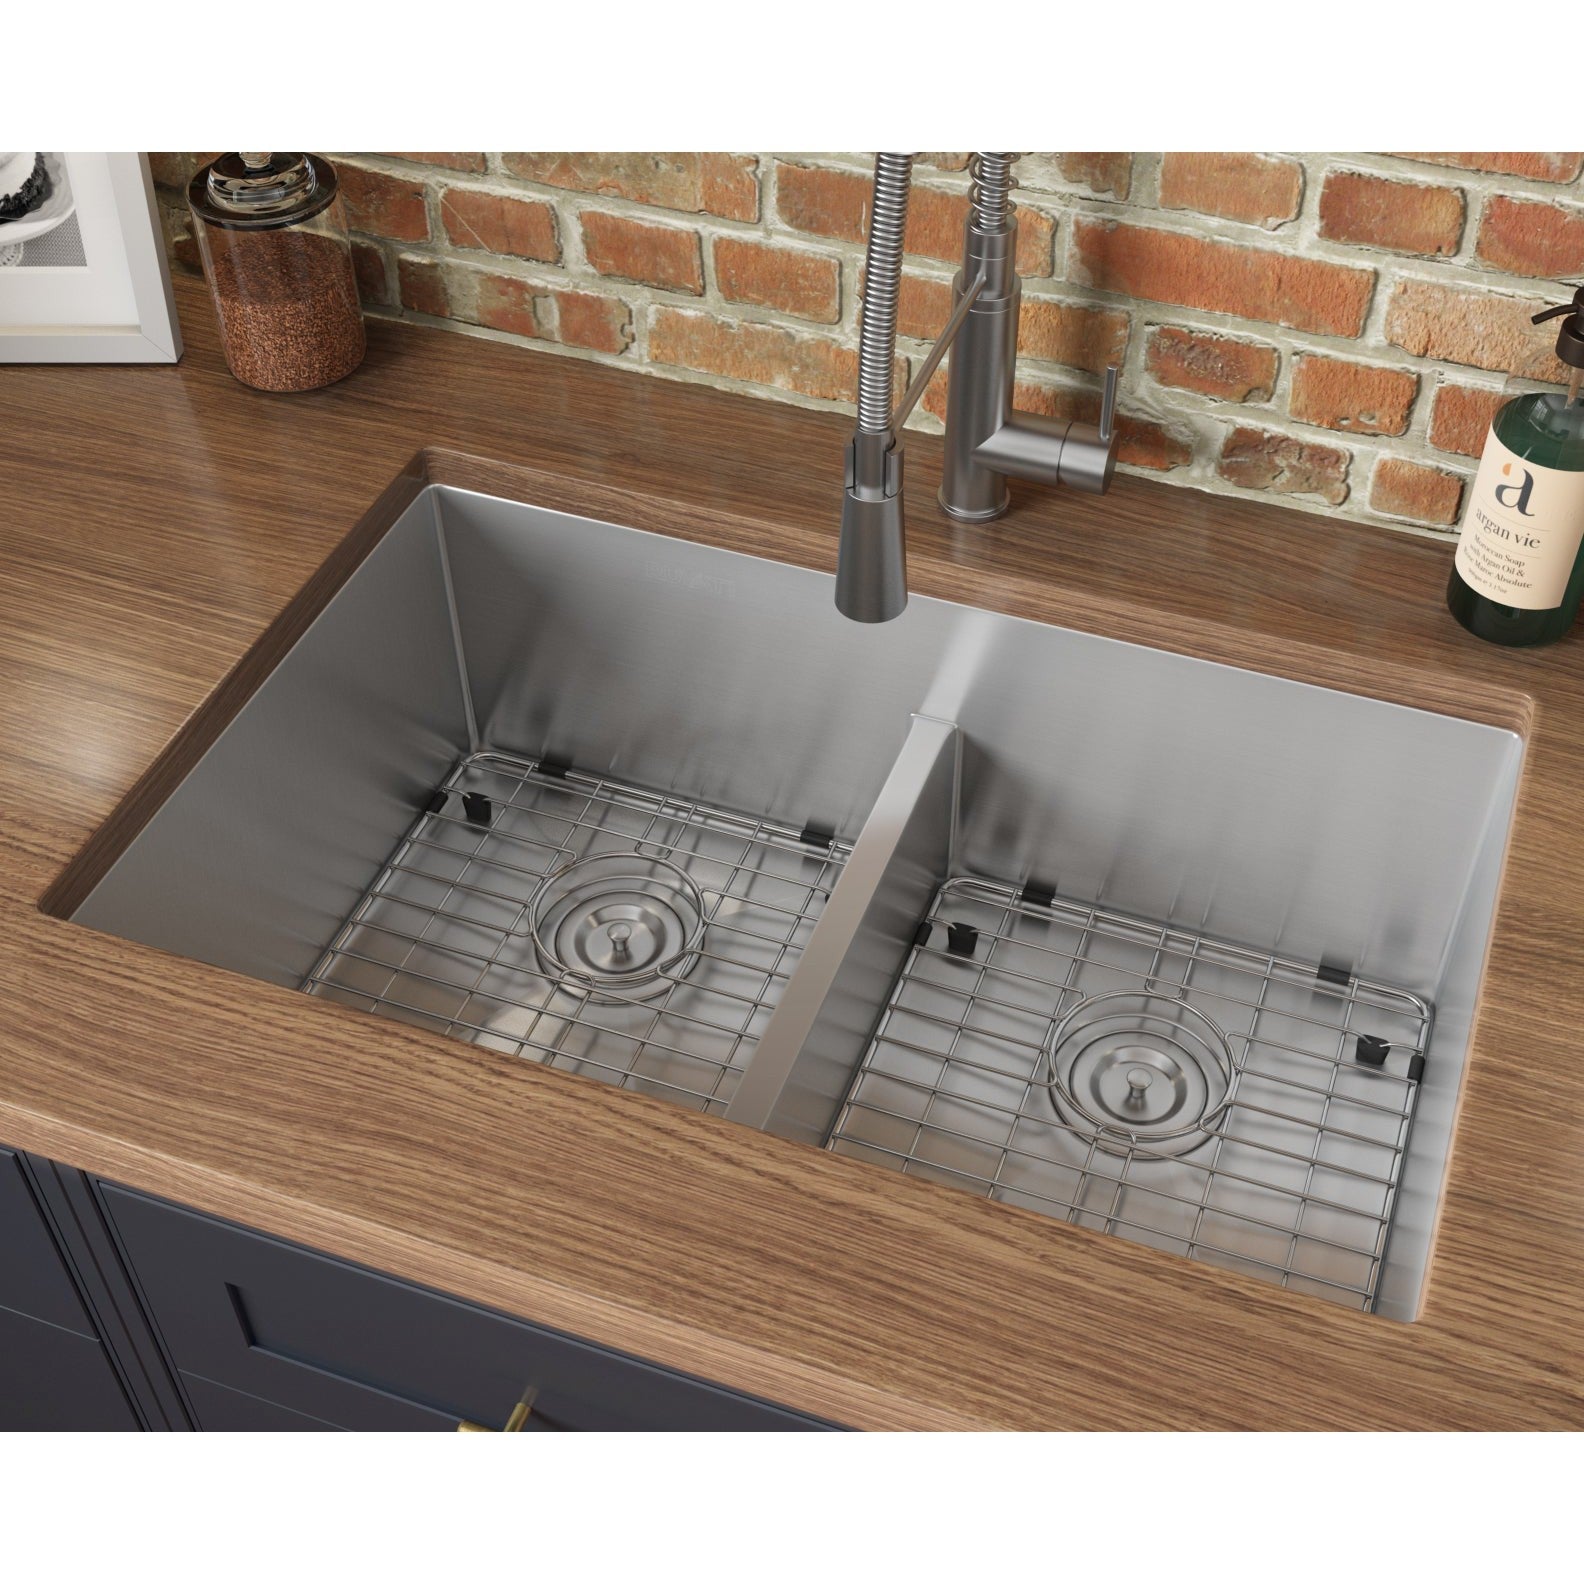 Ruvati Urbana 32” x 19" Undermount Stainless Steel 50/50 Double Bowl Low Divide Tight Radius Kitchen Sink With Basket Strainer, Bottom Rinse Grid and Drain Assembly